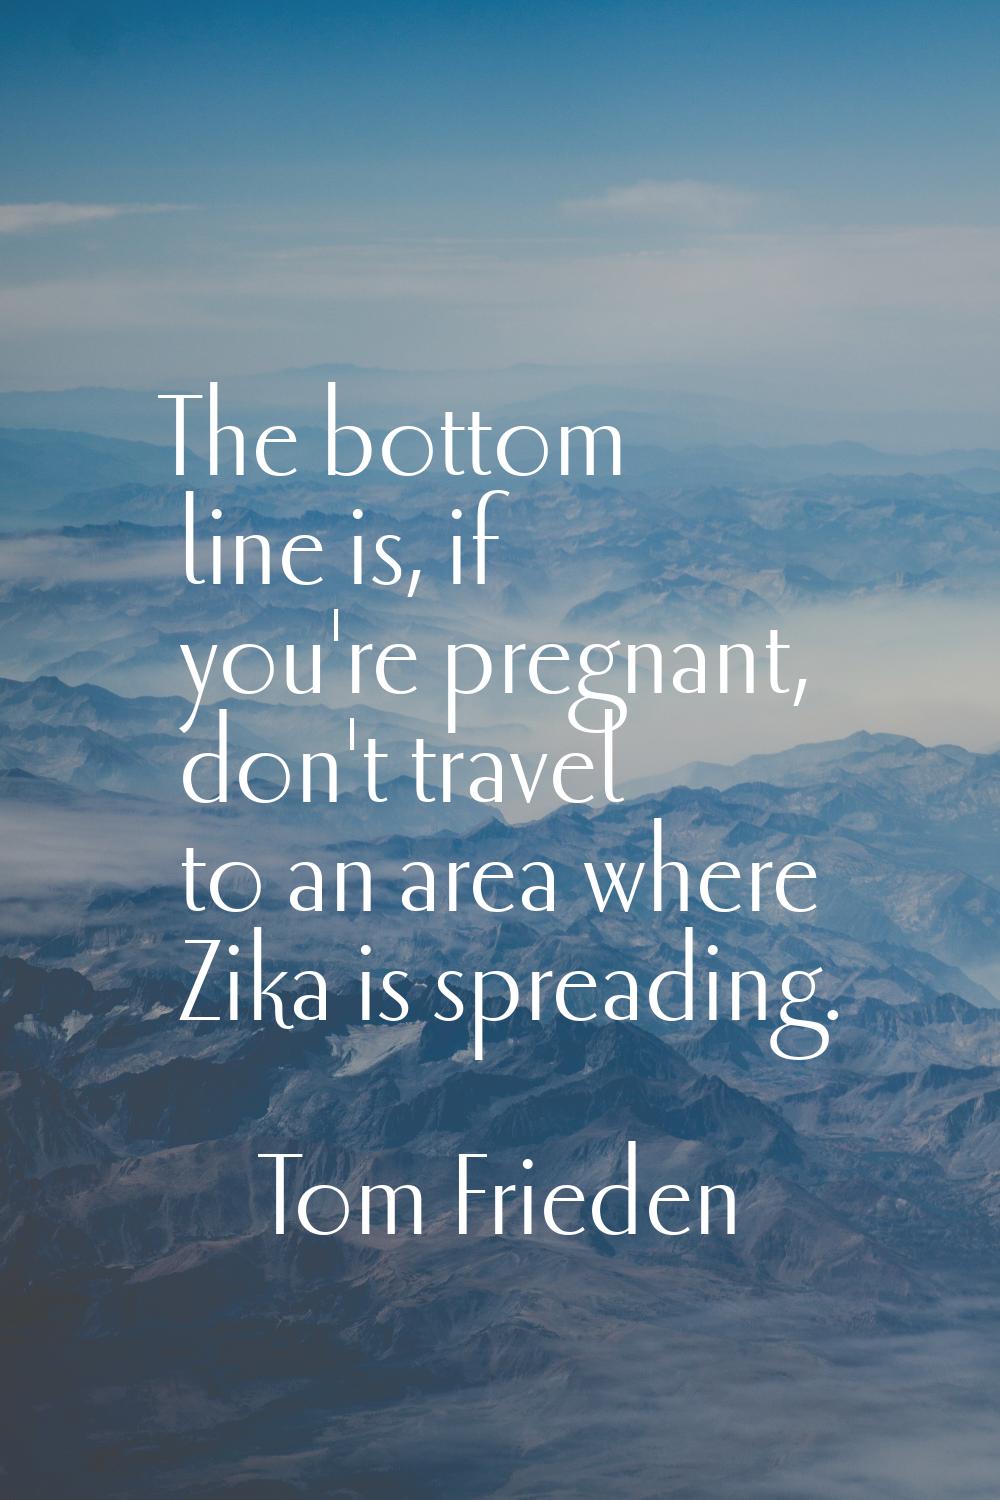 The bottom line is, if you're pregnant, don't travel to an area where Zika is spreading.